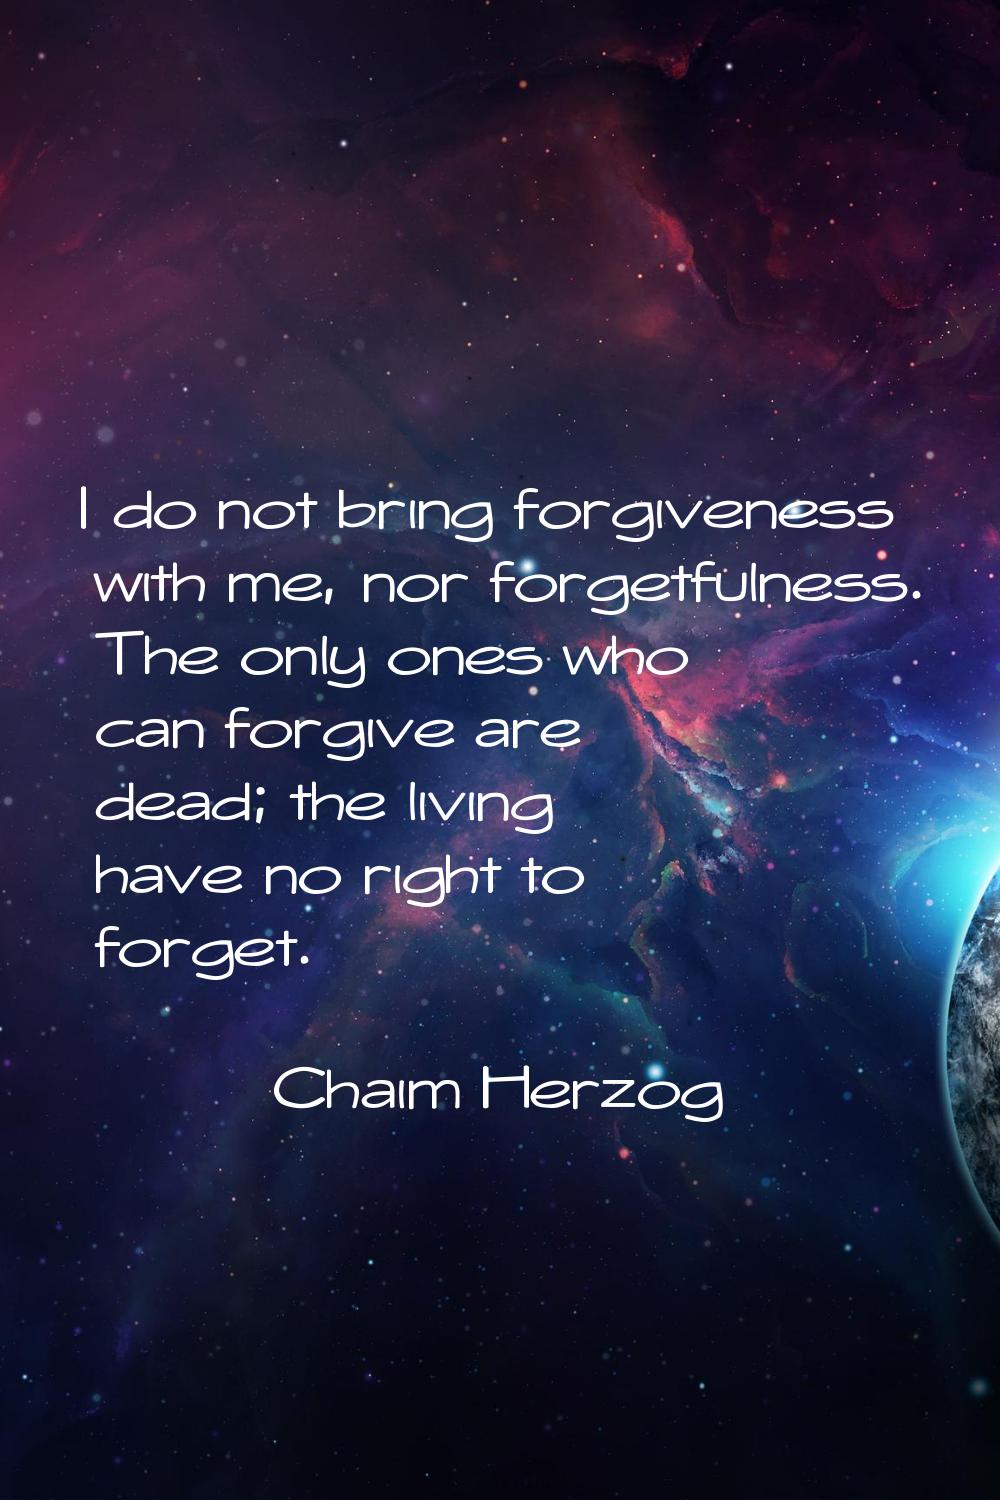 I do not bring forgiveness with me, nor forgetfulness. The only ones who can forgive are dead; the 